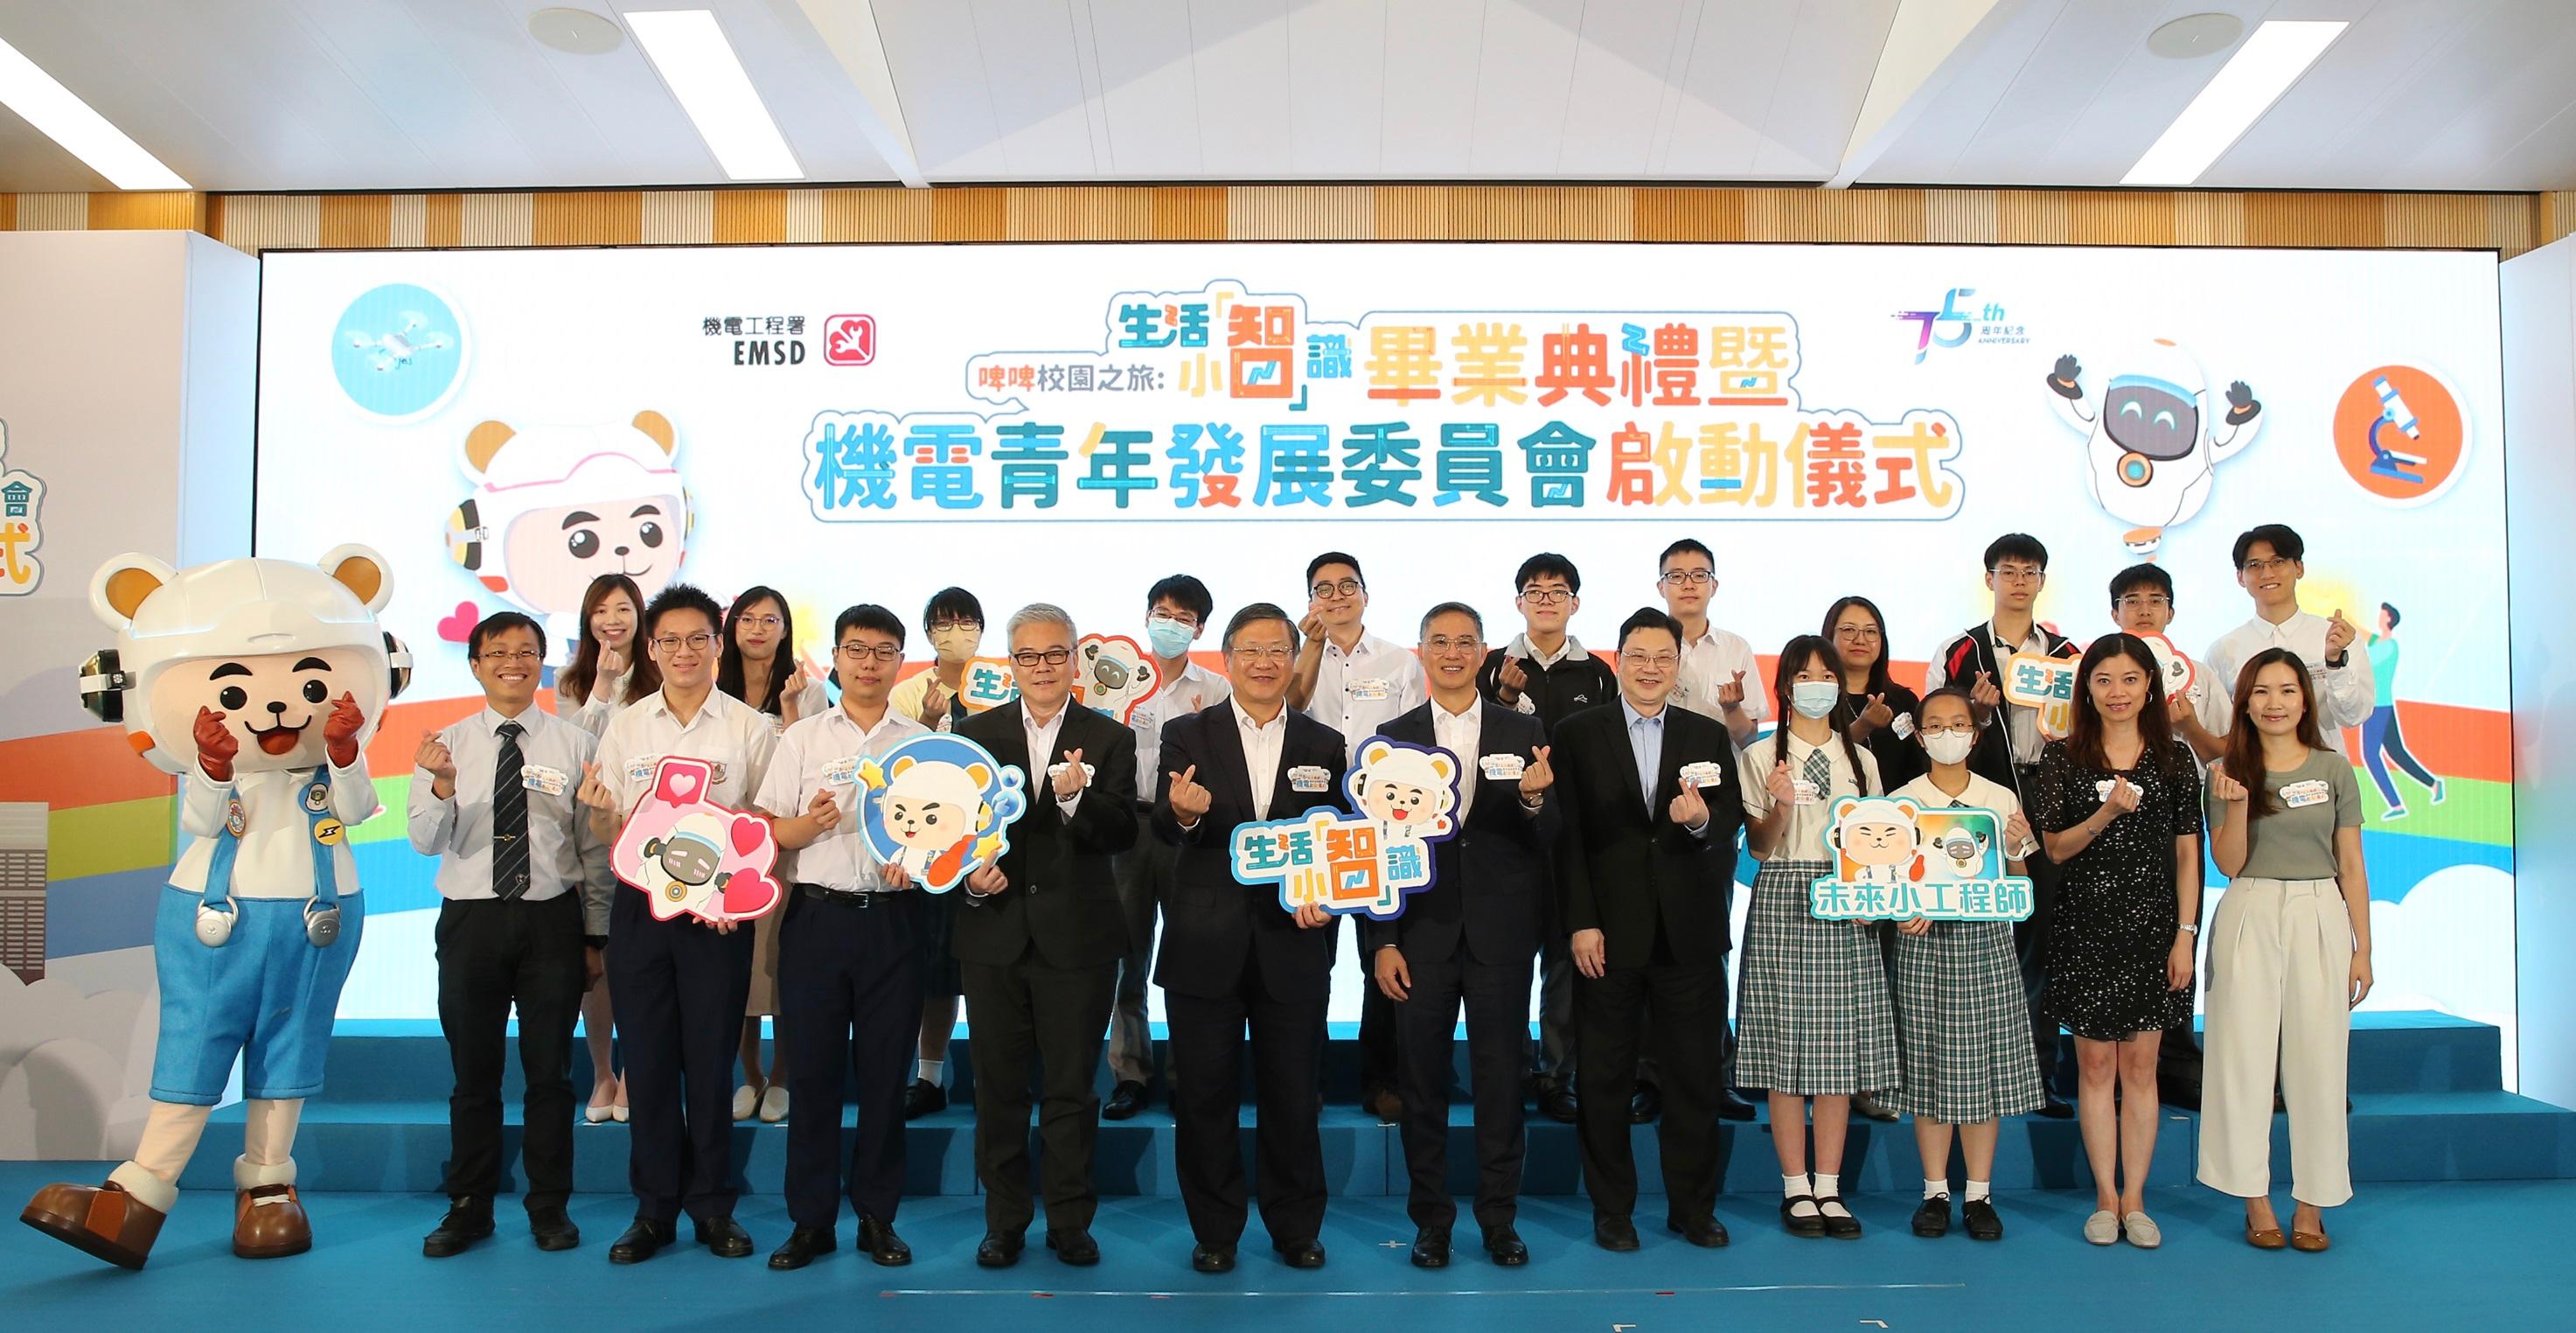 The Electrical and Mechanical Services Department (EMSD) held the "Witty Bear Campus Tour – EMbrace Smart Living in Daily Life" graduation ceremony and the E&M Youth Development Committee launching ceremony today (July 6). Photo shows the Permanent Secretary for Development (Works), Mr Ricky Lau (first row, sixth right); the Director of Electrical and Mechanical Services Department, Mr Eric Pang (first row, seventh right); Witty Bear; participants of the pilot STEM education programme "Witty Bear Campus Tour – EMbrace Smart Living in Daily Life"; school representatives and young engineers of the EMSD at the ceremony.